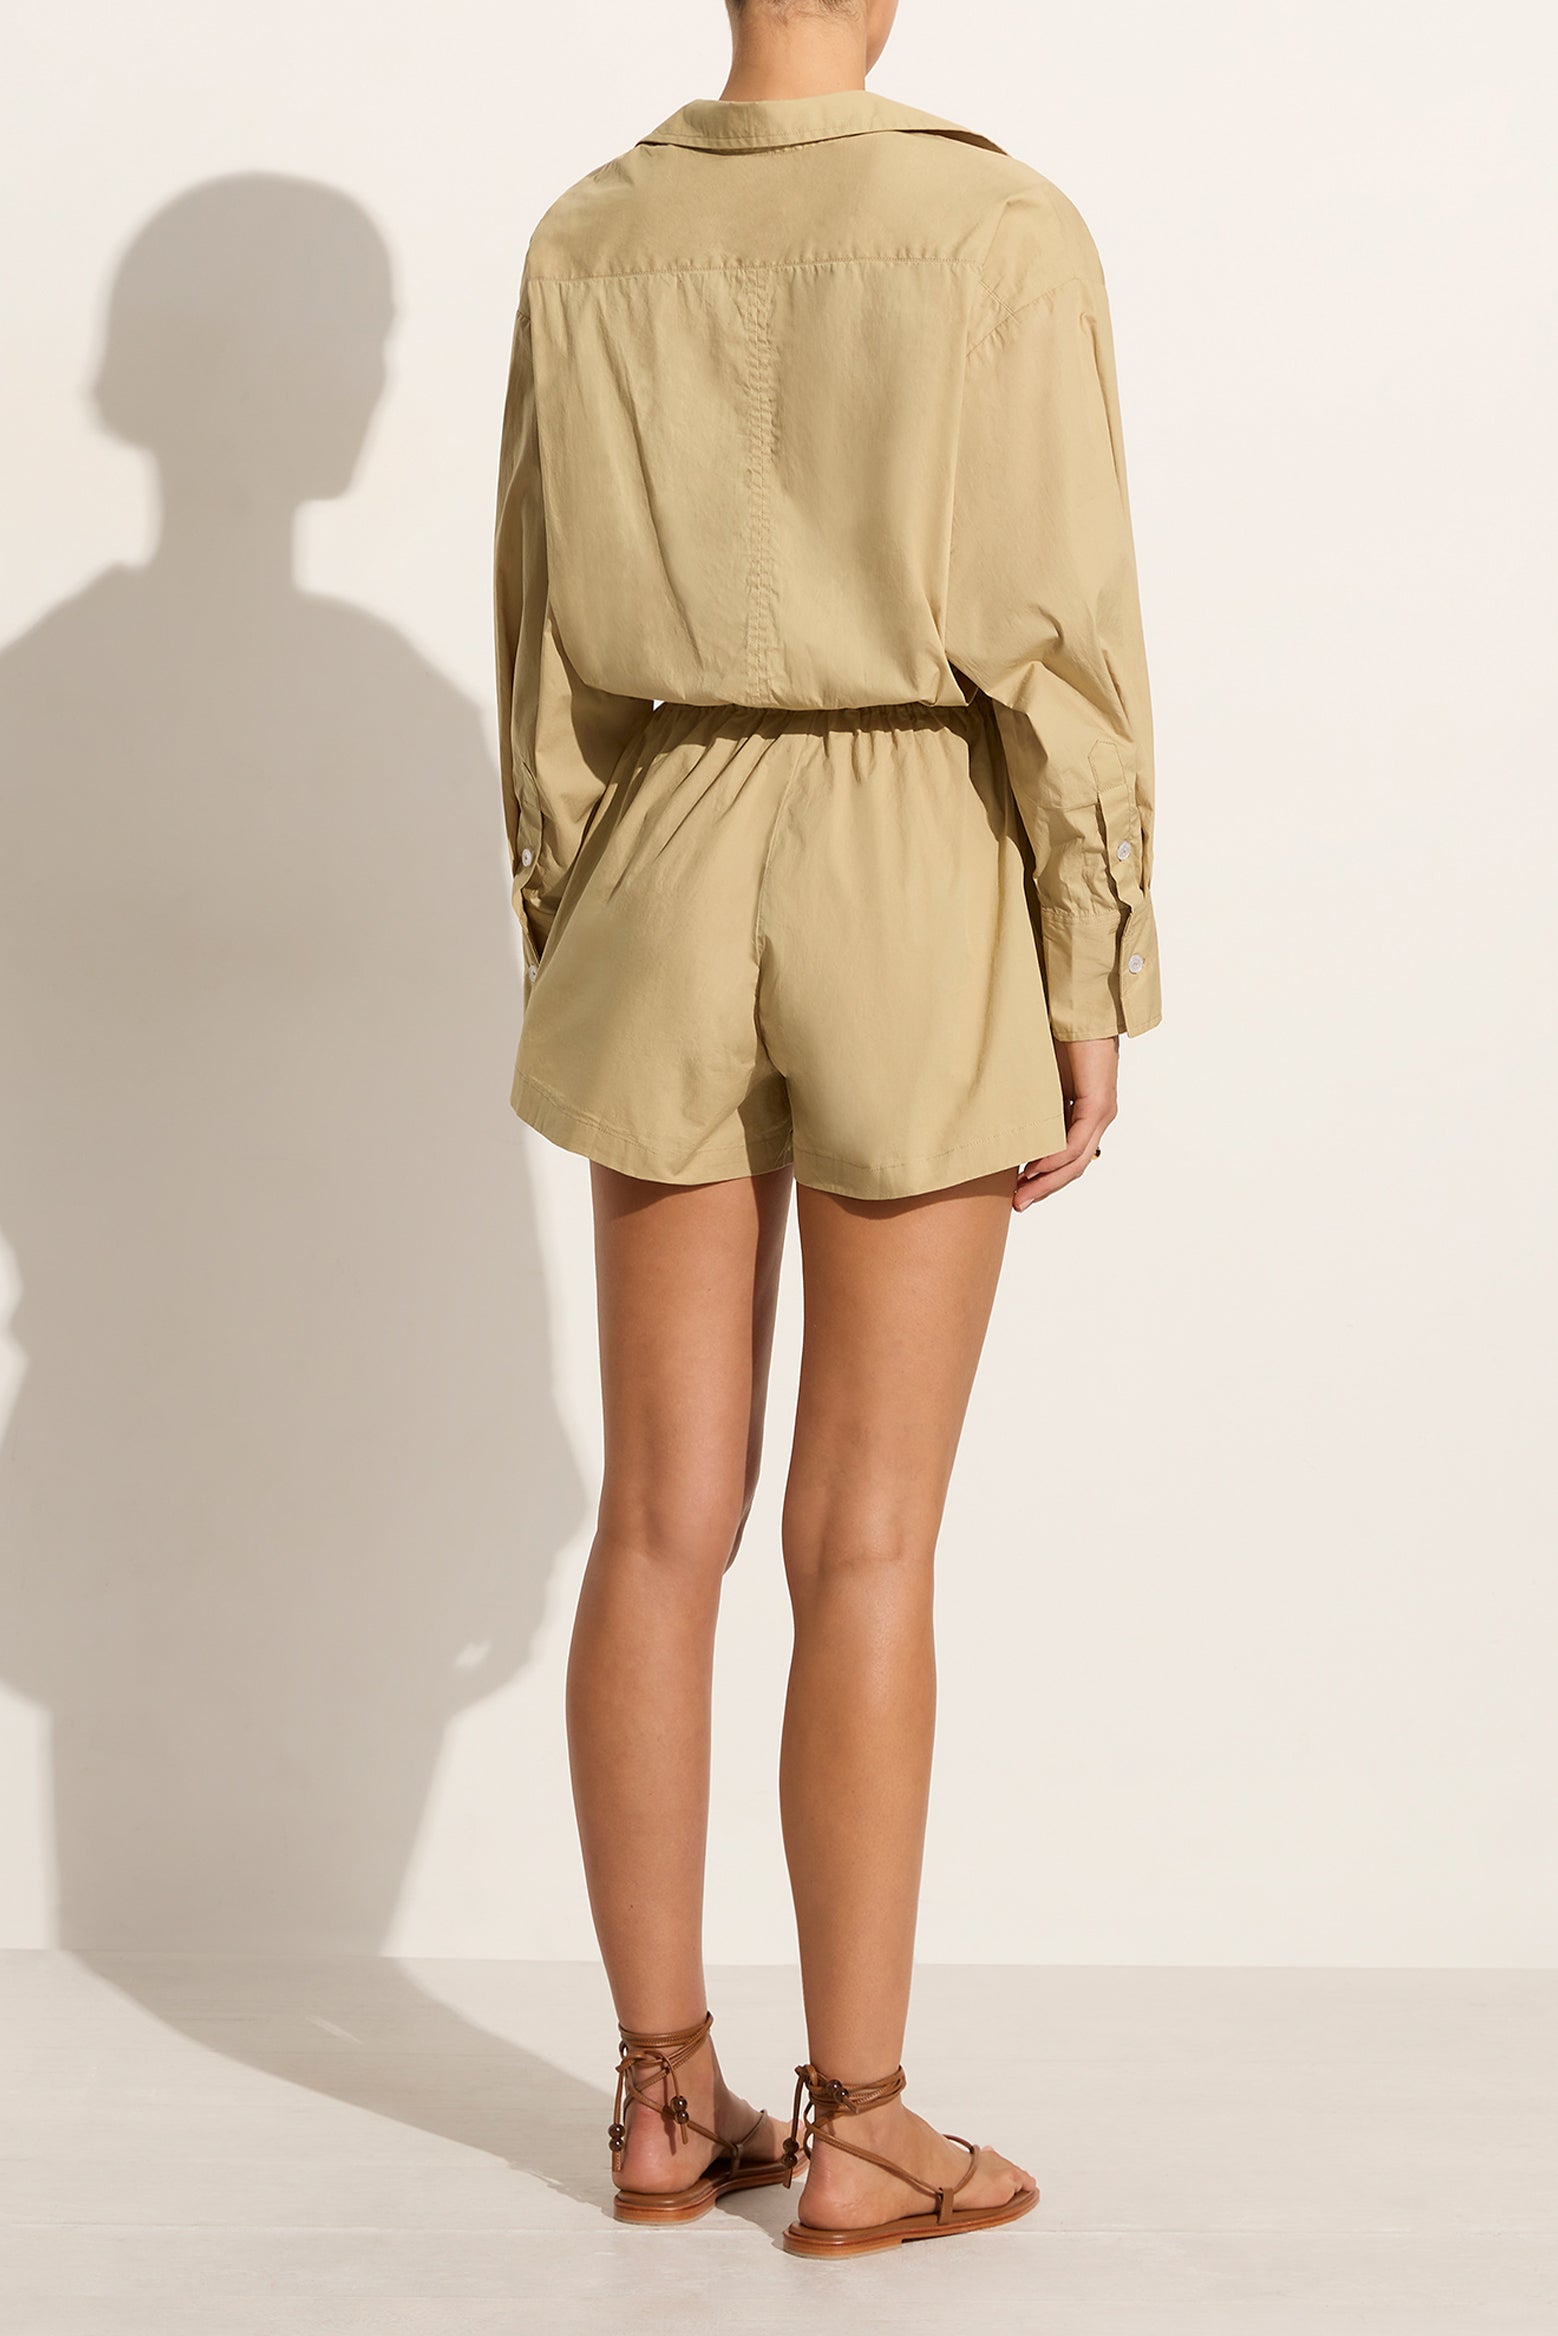 The Faithfull the Brand Isole Playsuit in Basil available at The New Trend Australia